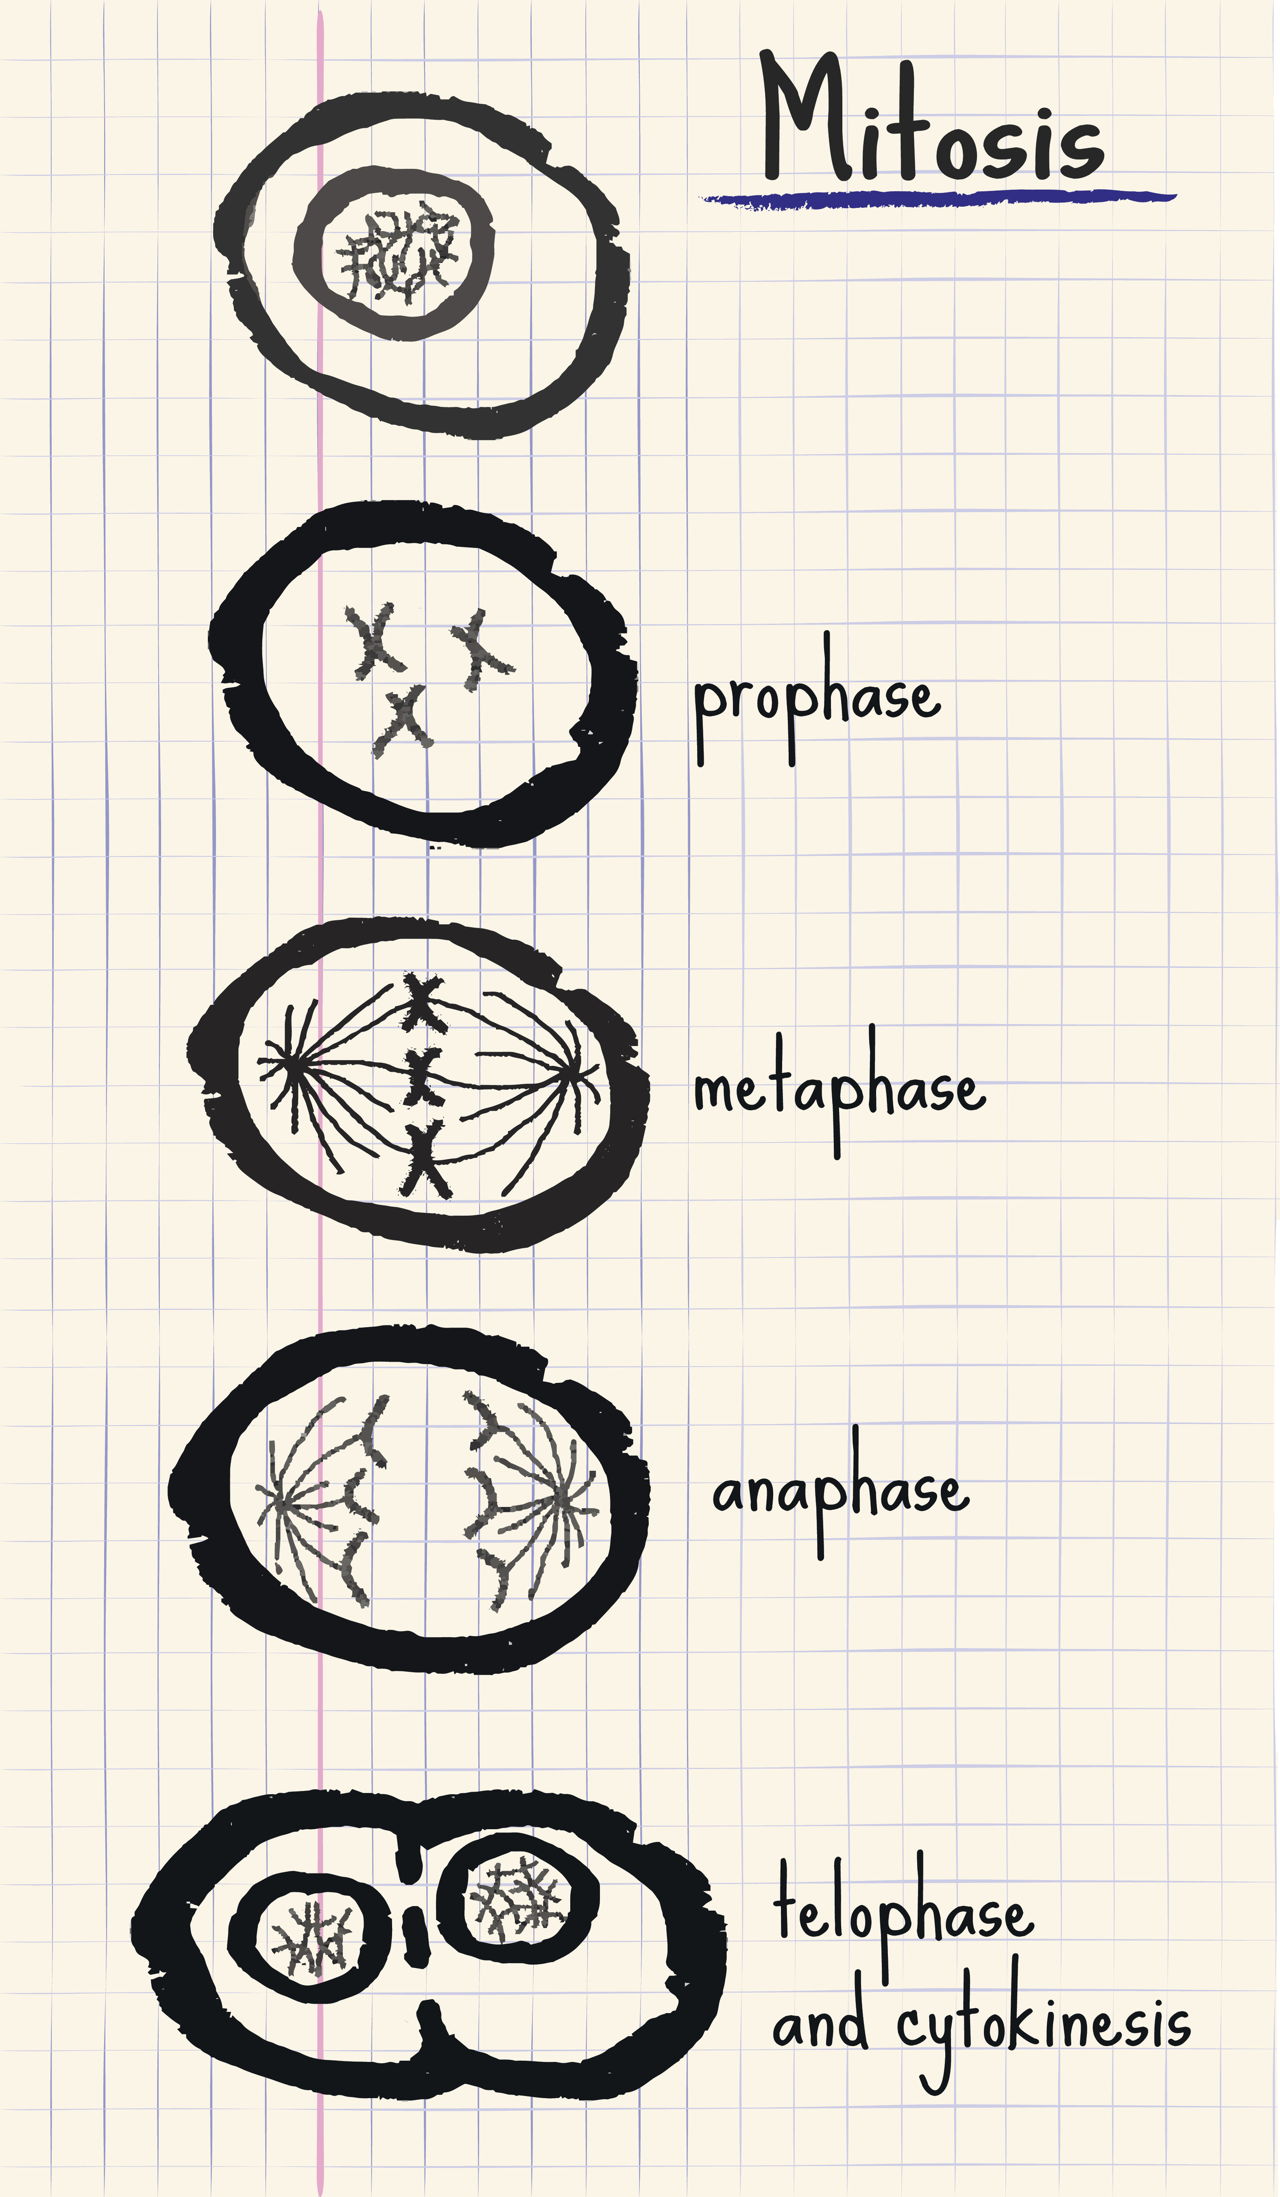 mitosis and meiosis difference